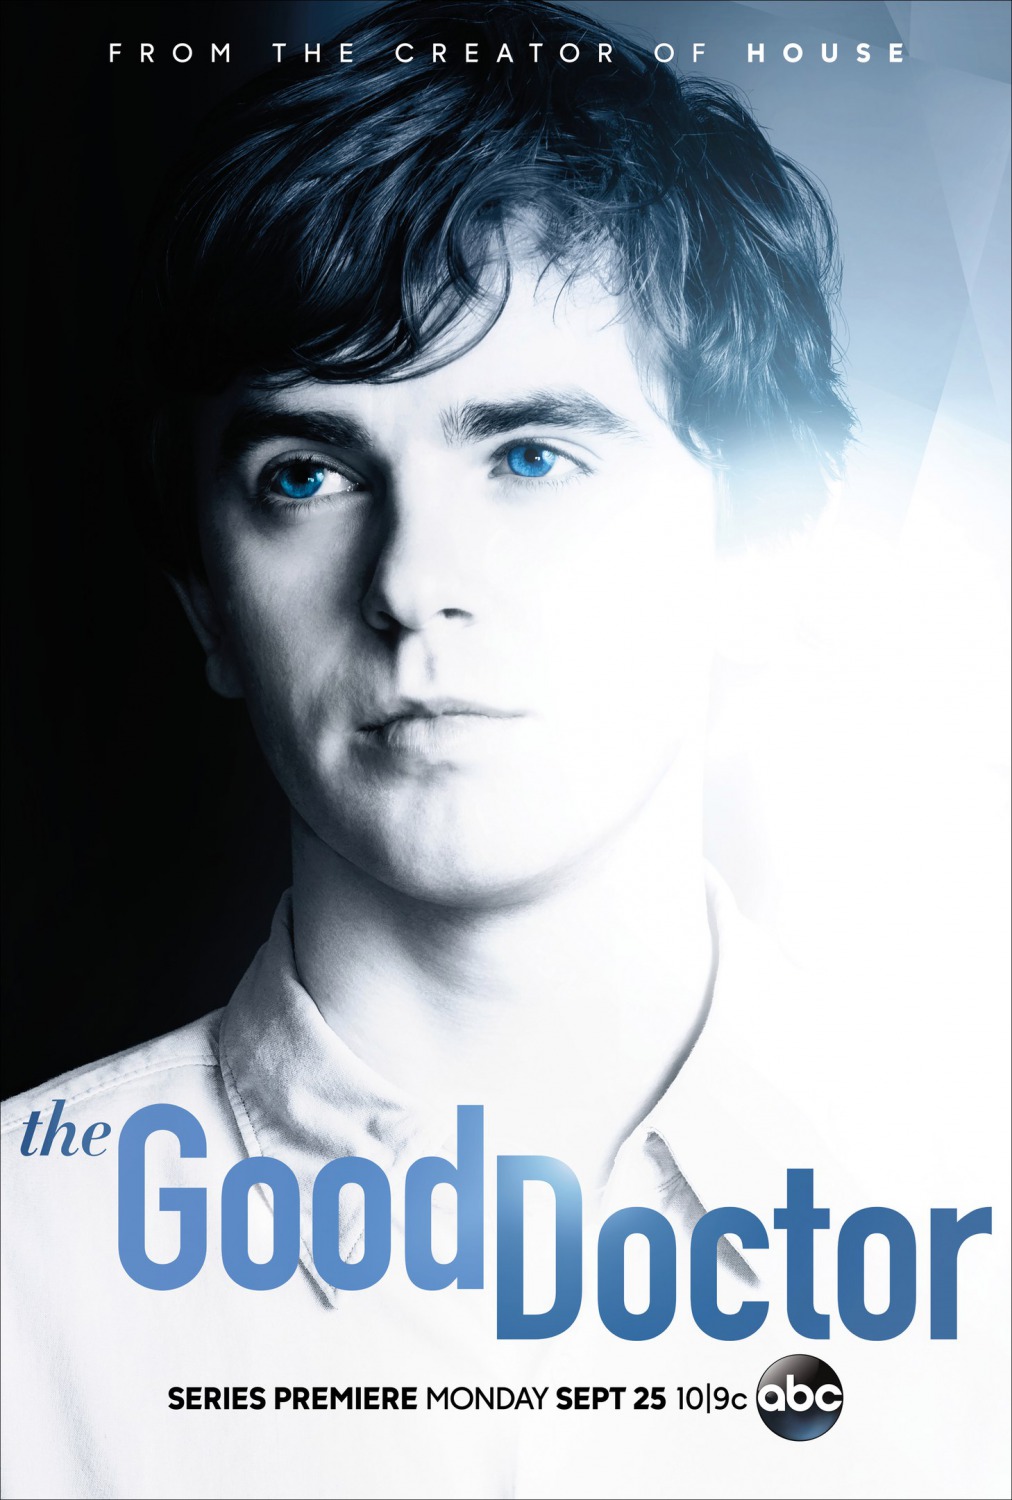 THE GOOD DOCTOR Series Trailer, Promos, Featurettes, Images and Posters